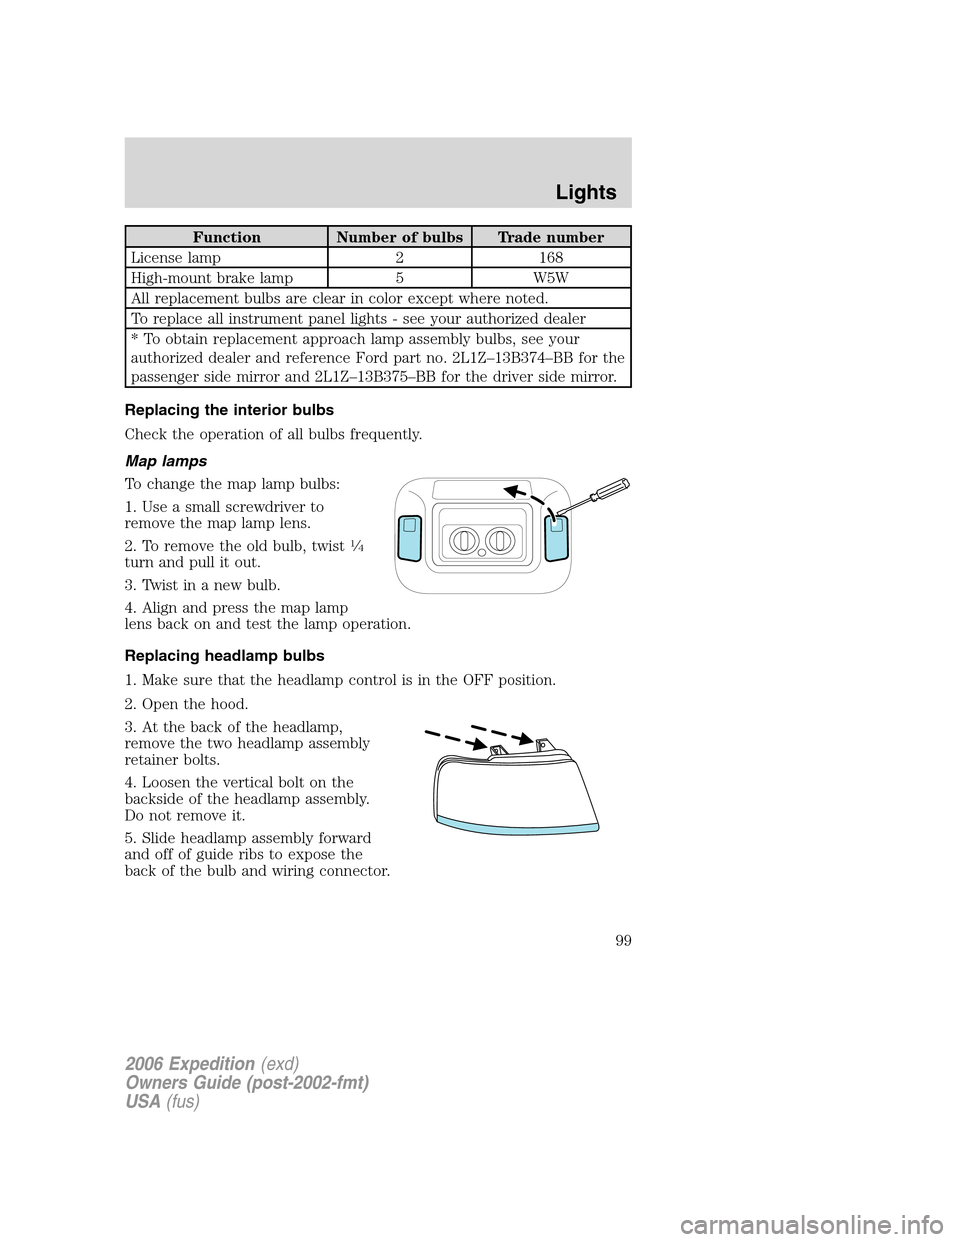 FORD EXPEDITION 2006 2.G Owners Manual Function Number of bulbs Trade number
License lamp 2 168
High-mount brake lamp 5 W5W
All replacement bulbs are clear in color except where noted.
To replace all instrument panel lights - see your auth